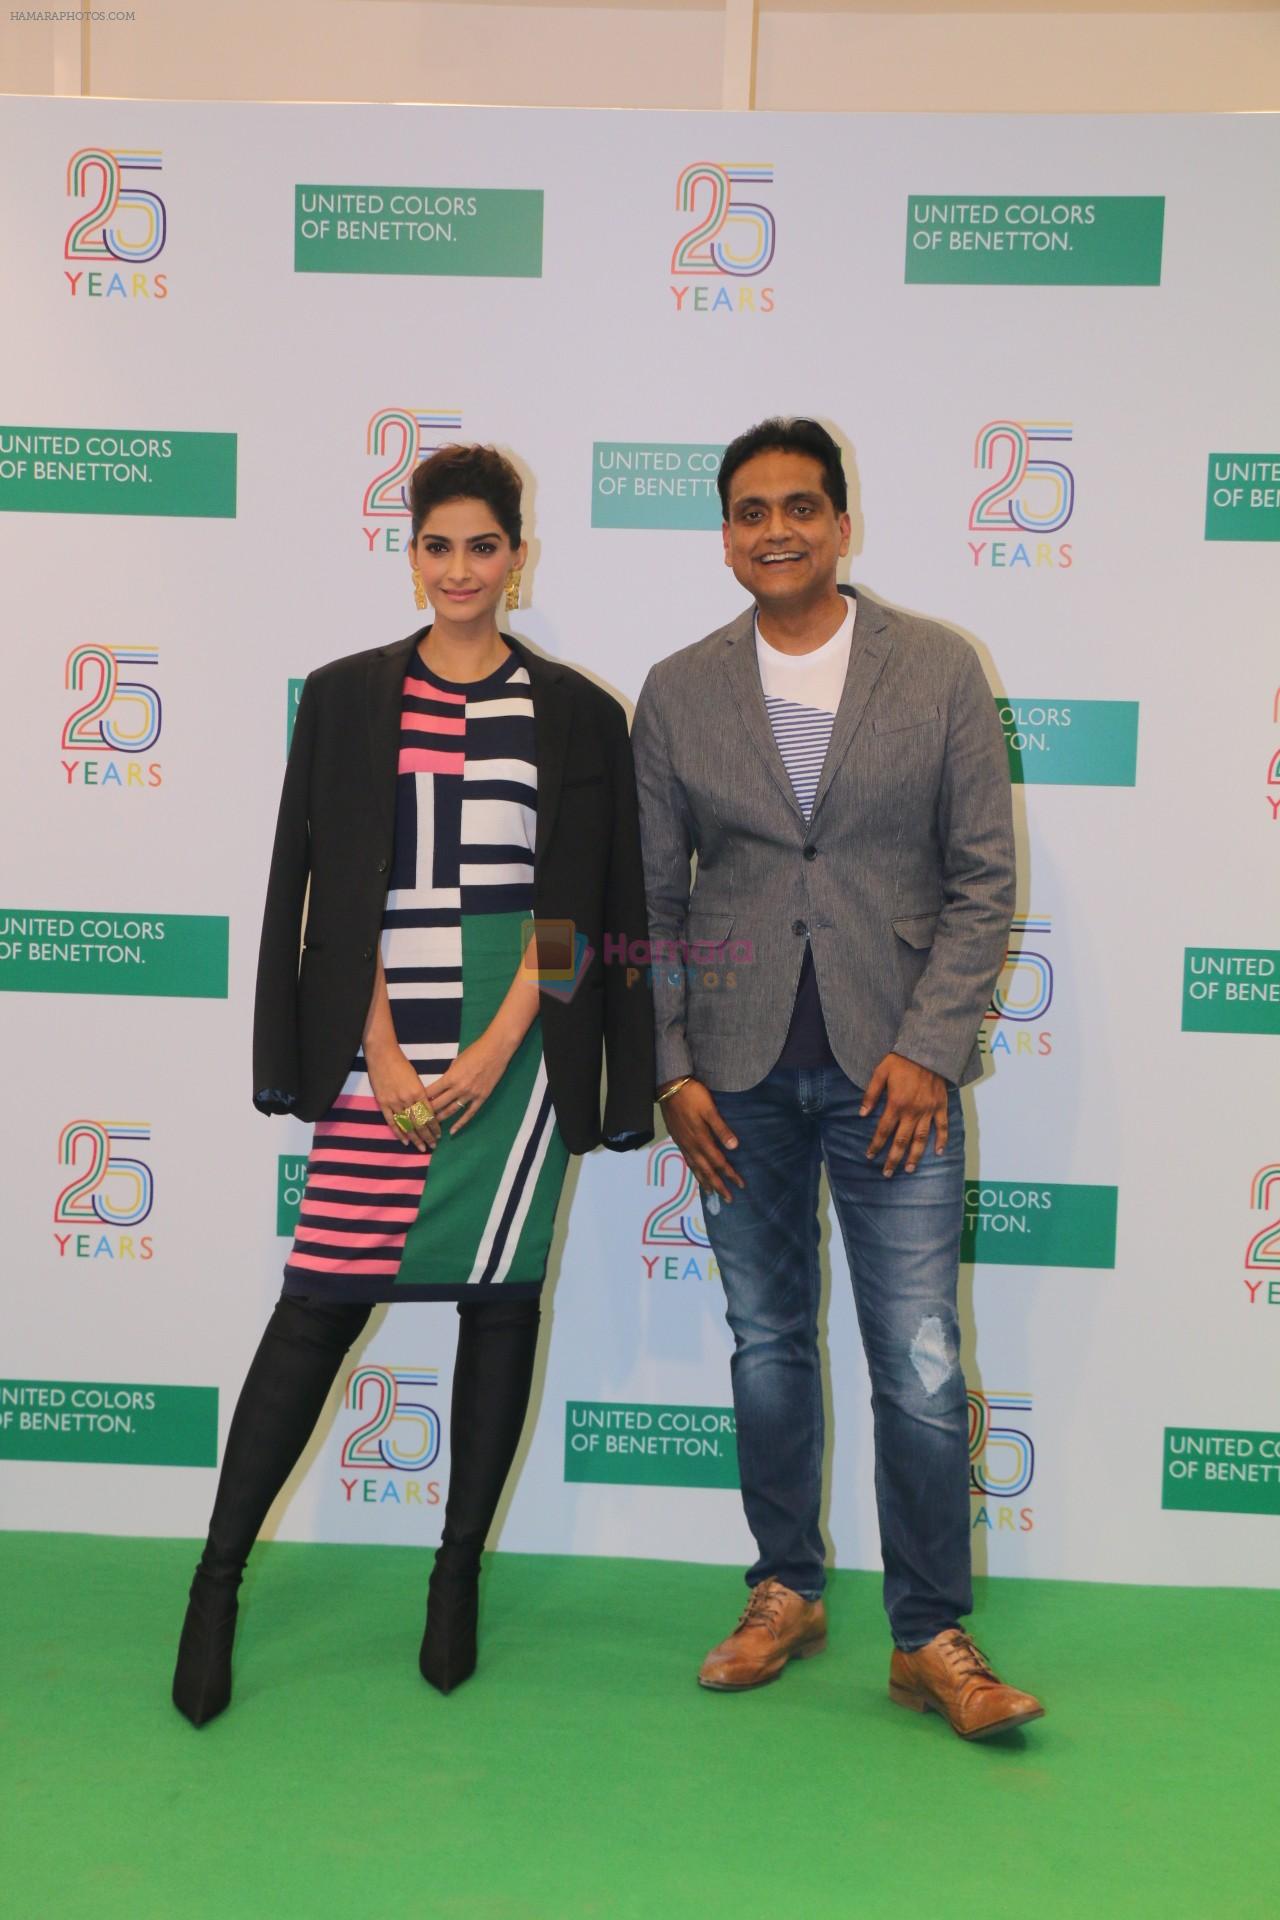 Sonam Kapoor During The 25 Years Celebration Of Benetton India Of Heritage And Values In India At United Colors Of Benetton